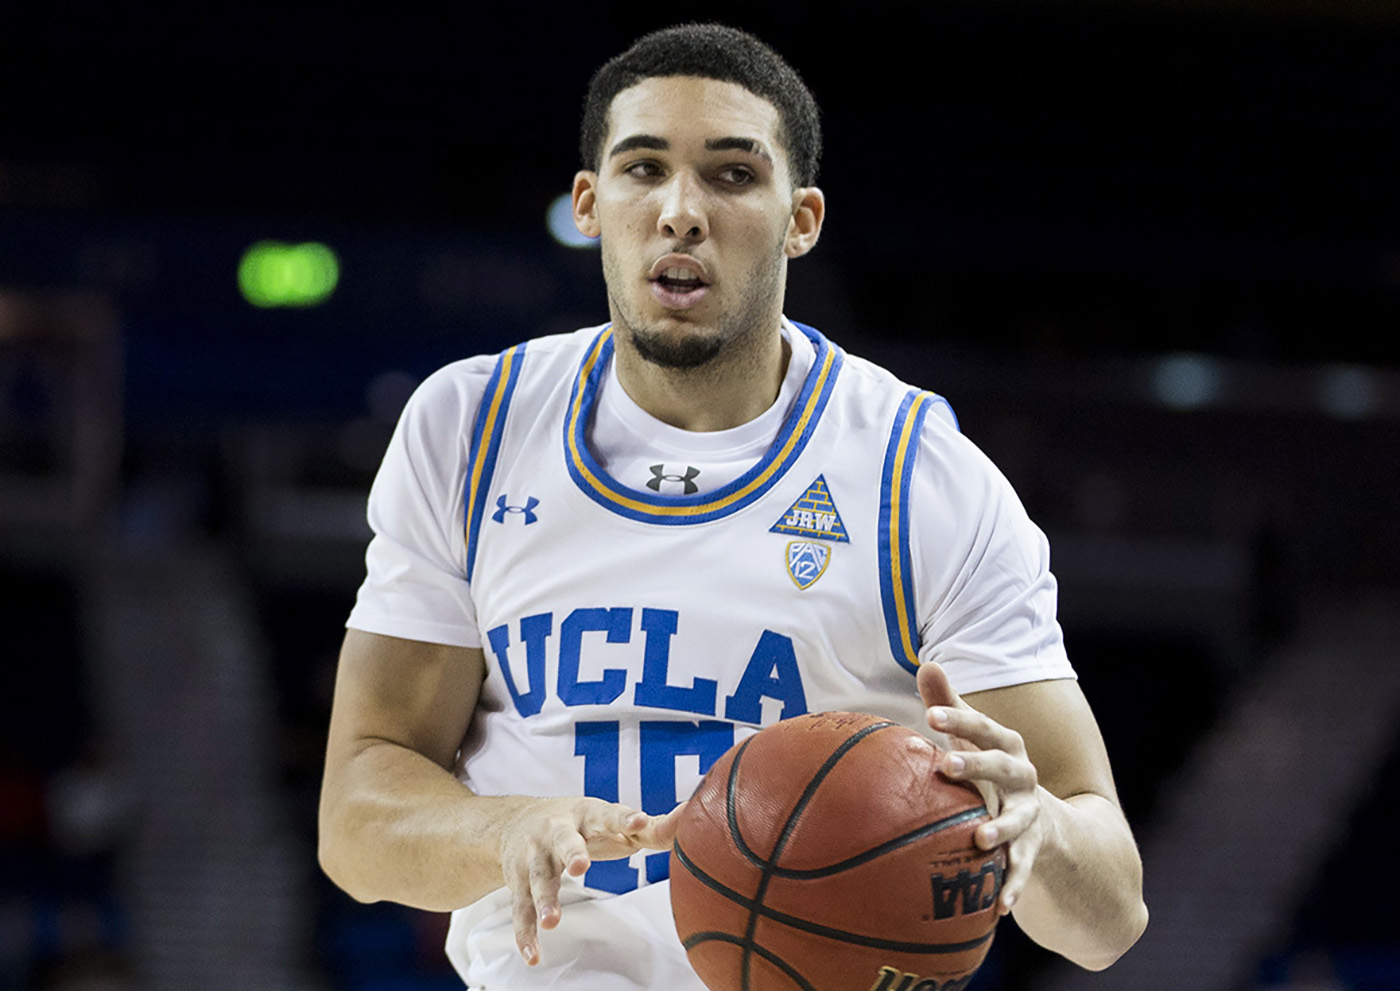 Three UCLA basketball players, including LiAngelo Ball, detained